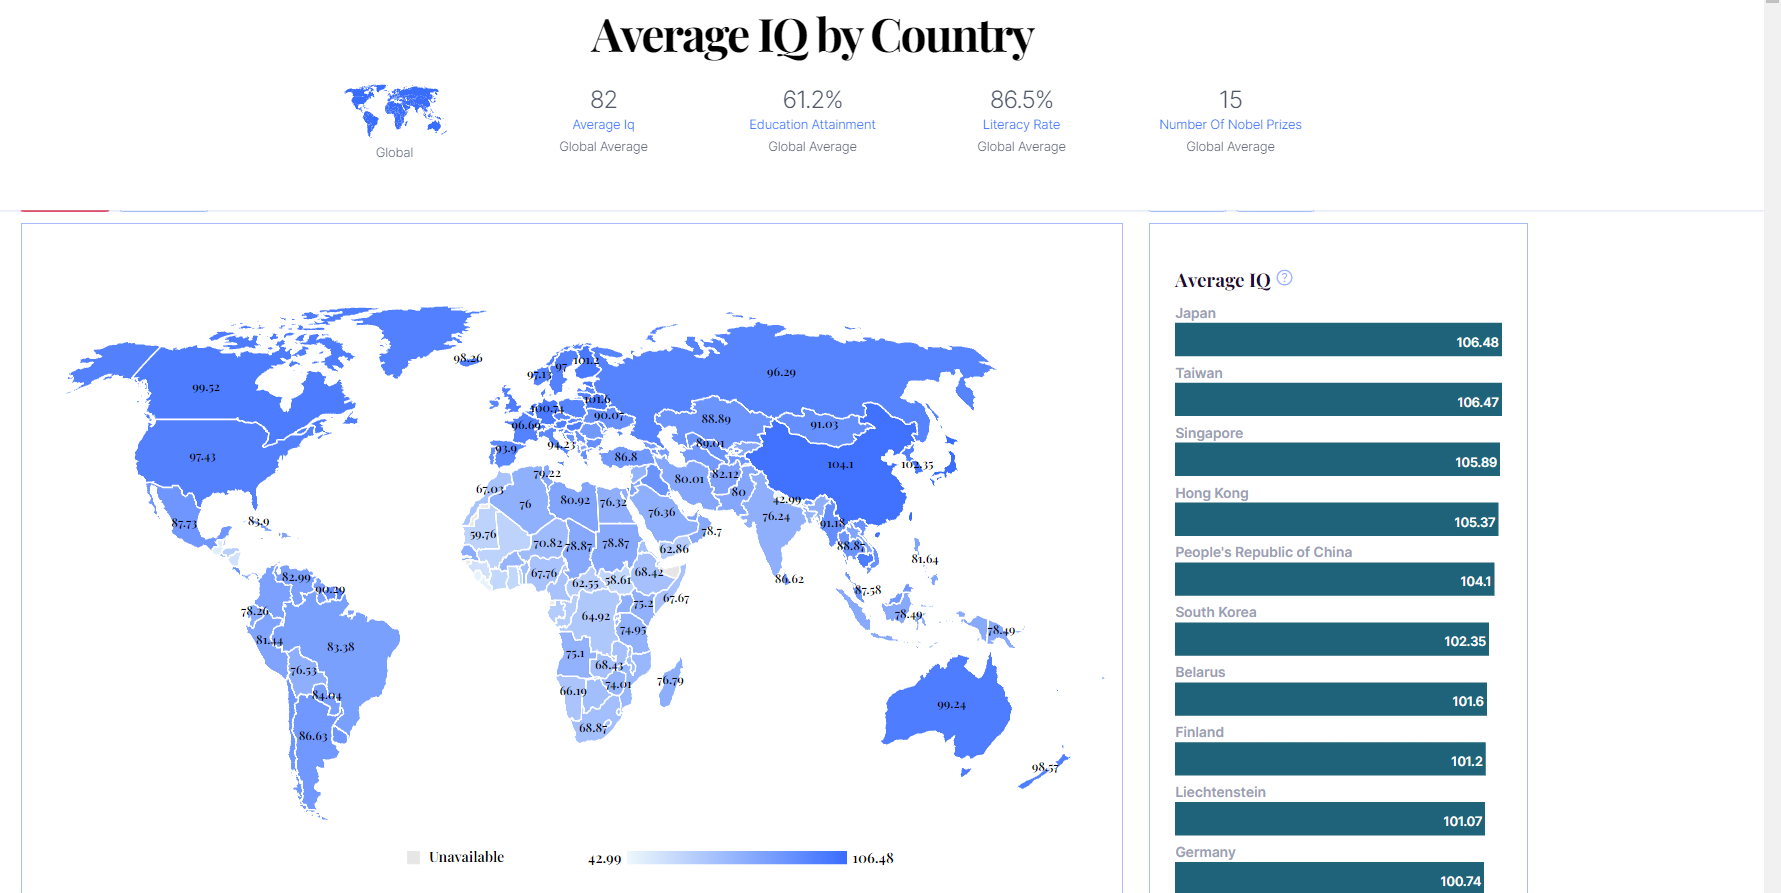 Countries have the highest IQ score